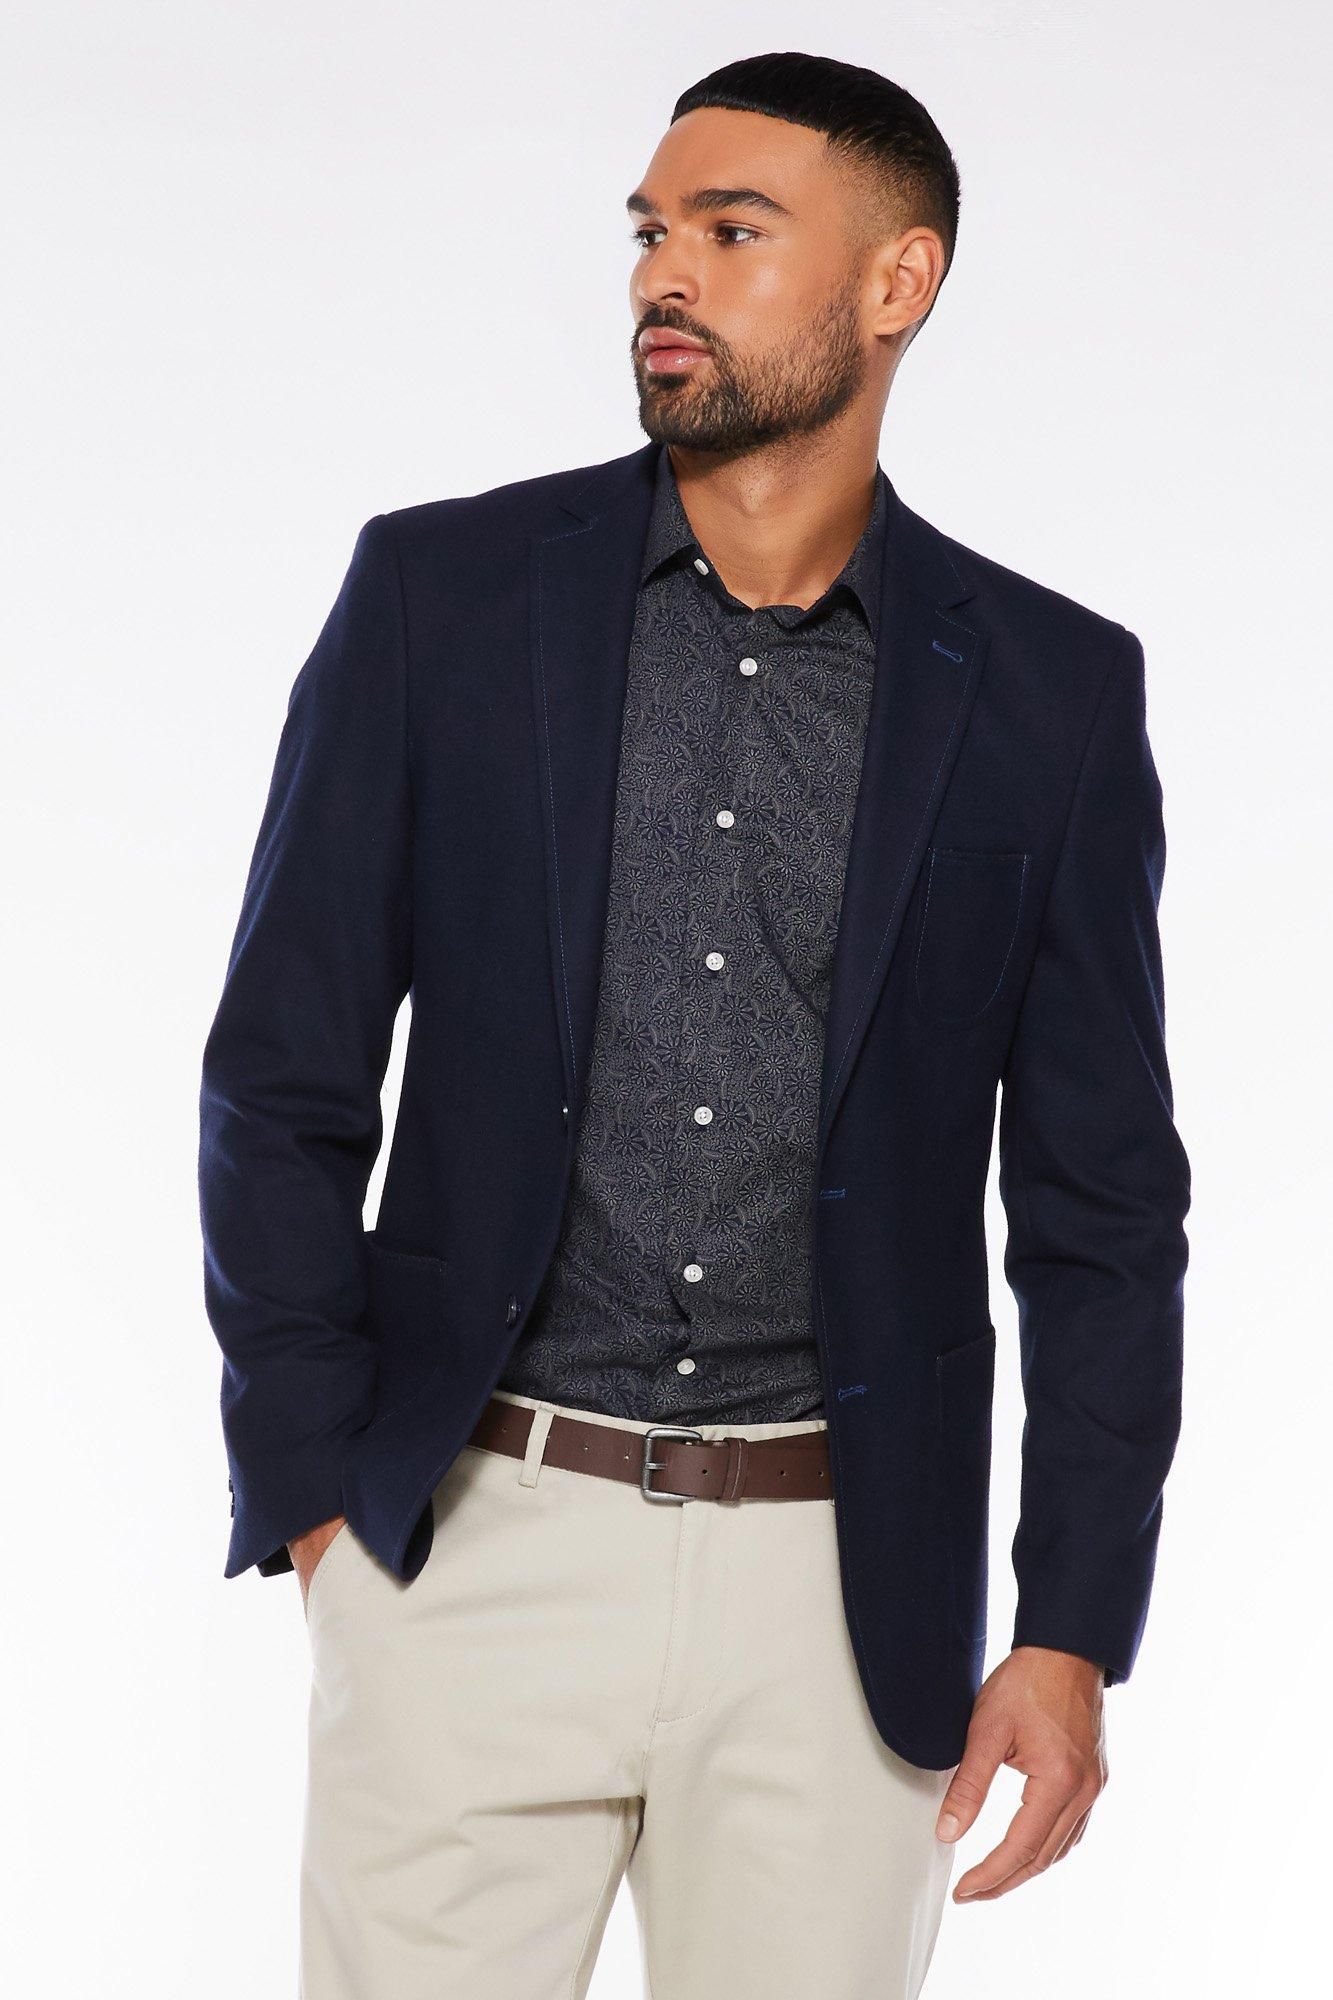 Navy Soft Touch Fabric  	Double Button Fastening  	Double Vented Back  	Functional Side Patch Pockets and Breast Pocket  	Lined with Internal Pocket  	Notch Lapel